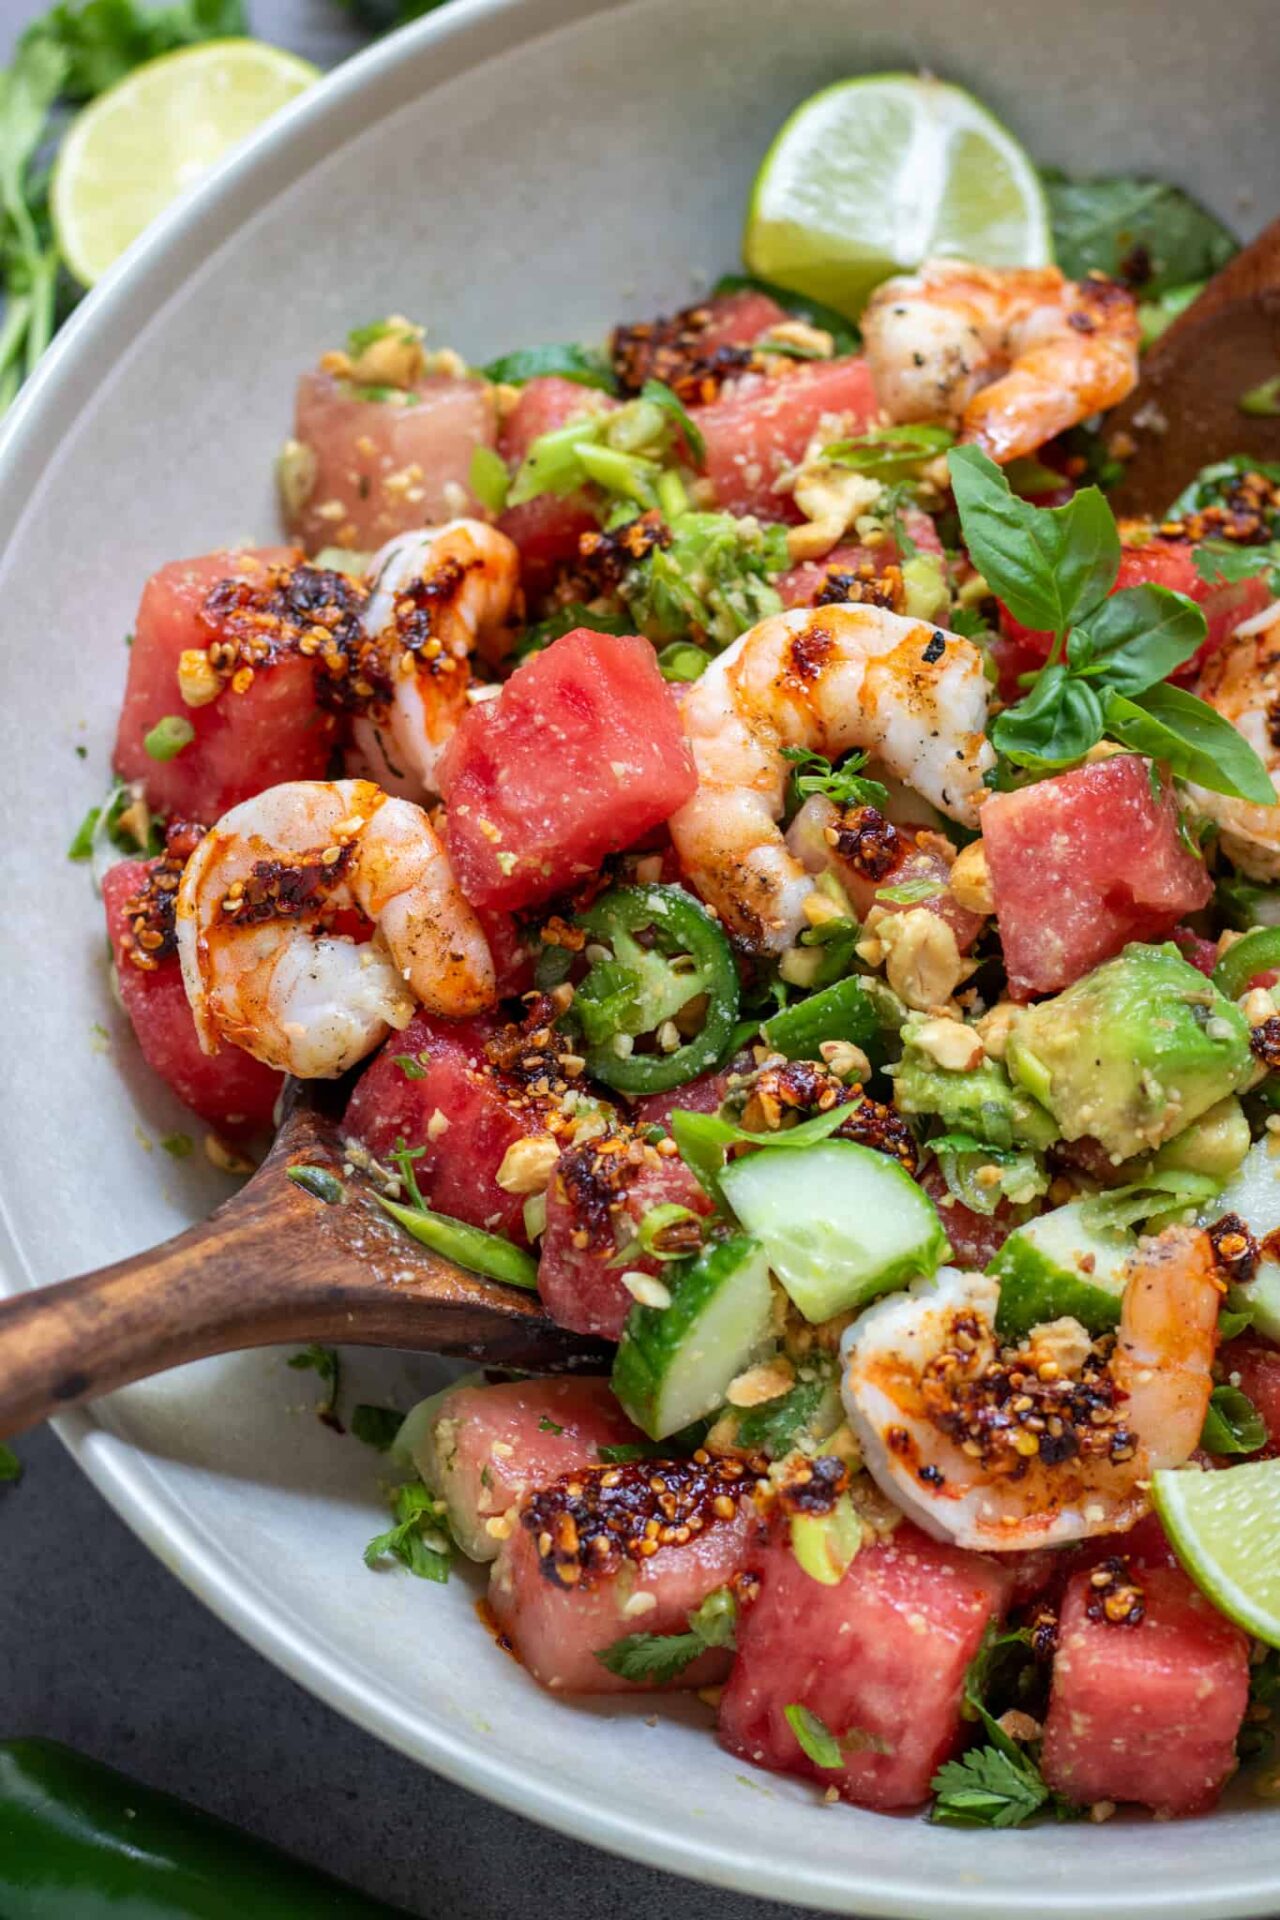 A large cream colored serving bowl filled with spicy watermelon salad. There's a wooden serving spoon in the salad. It's topped with chili crunch oil, and grilled shrimp.